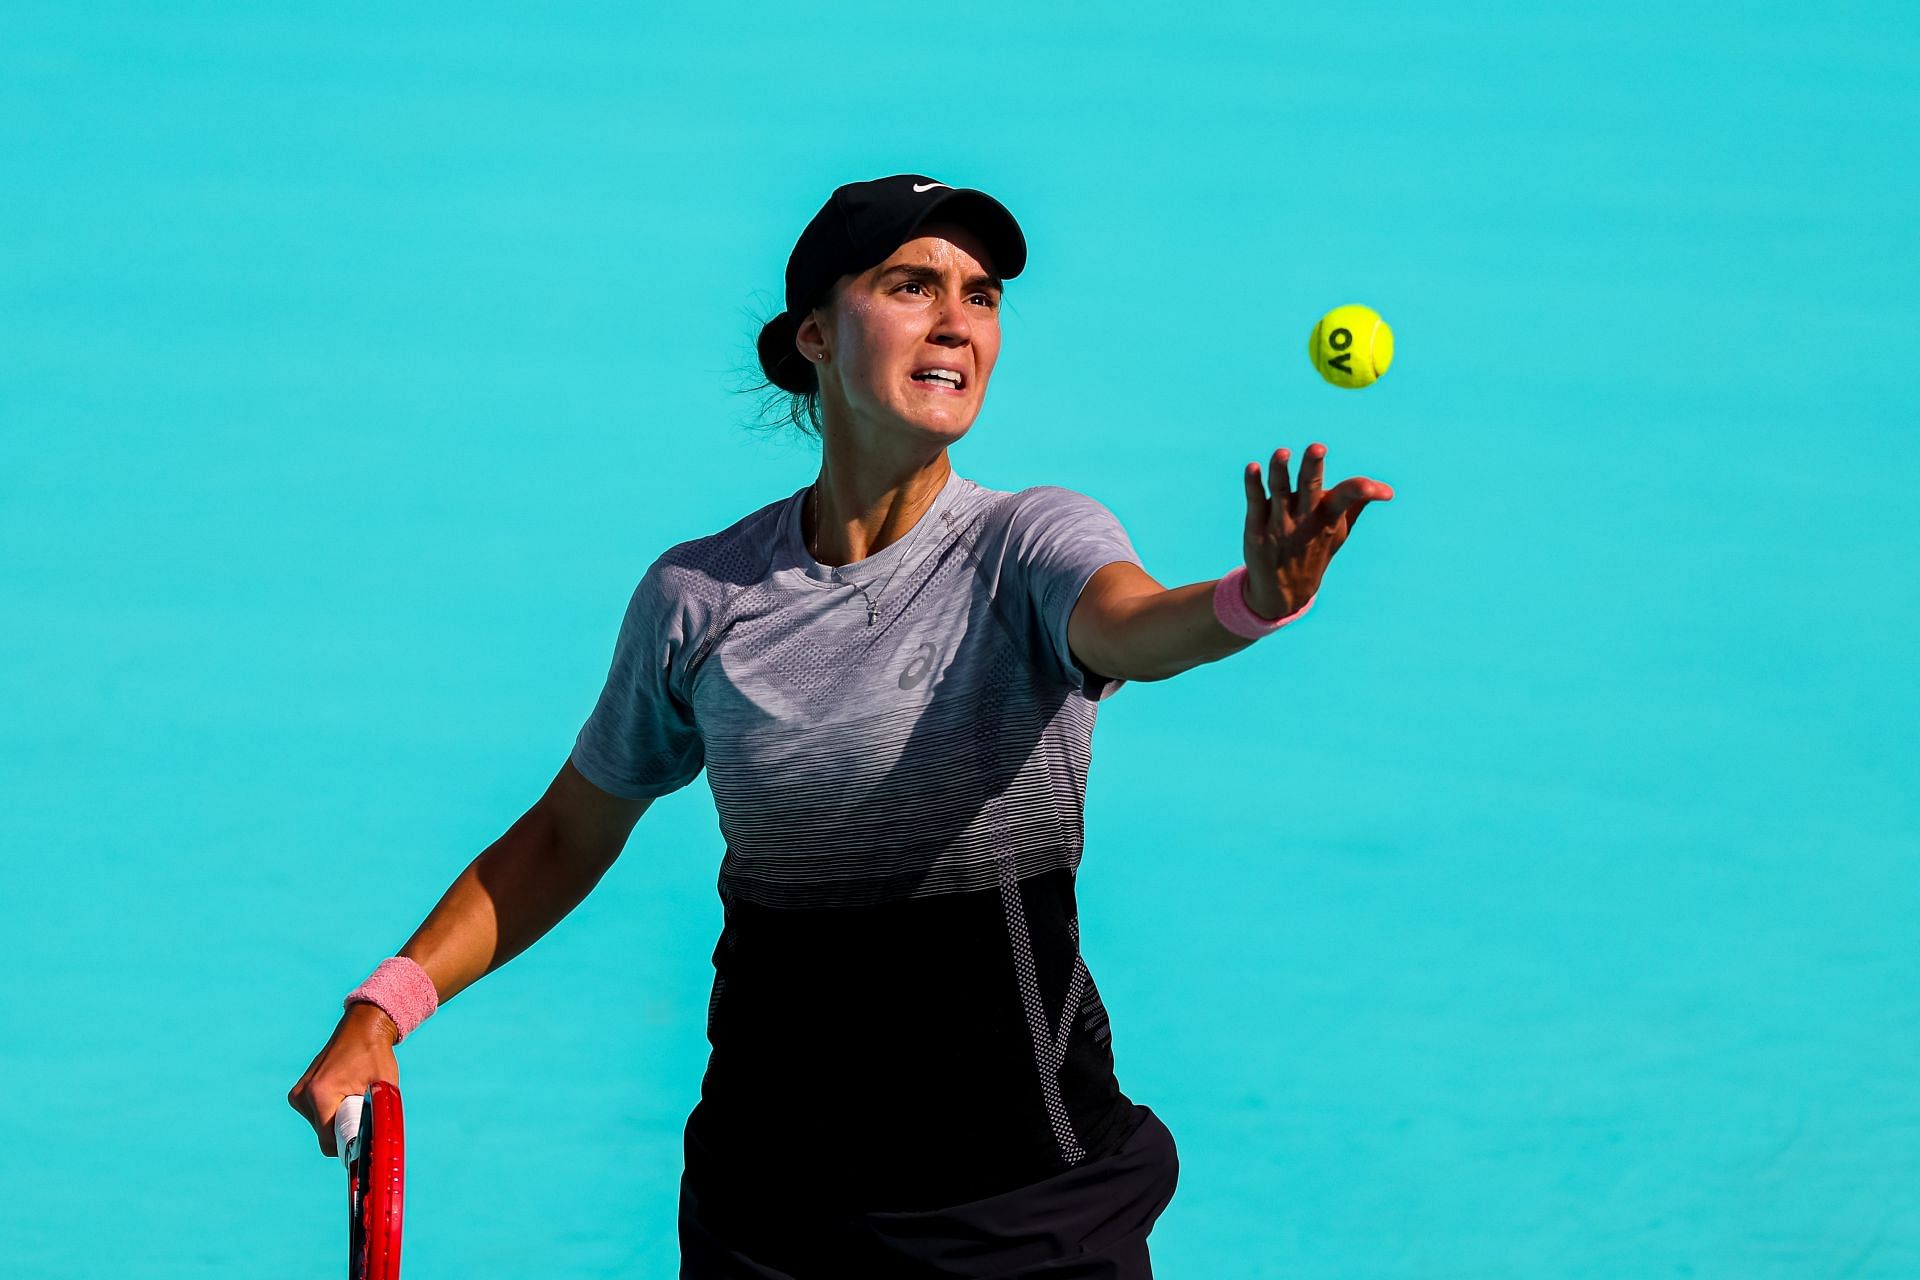 Anhelina Kalinina in action at the Abu Dhabi Open